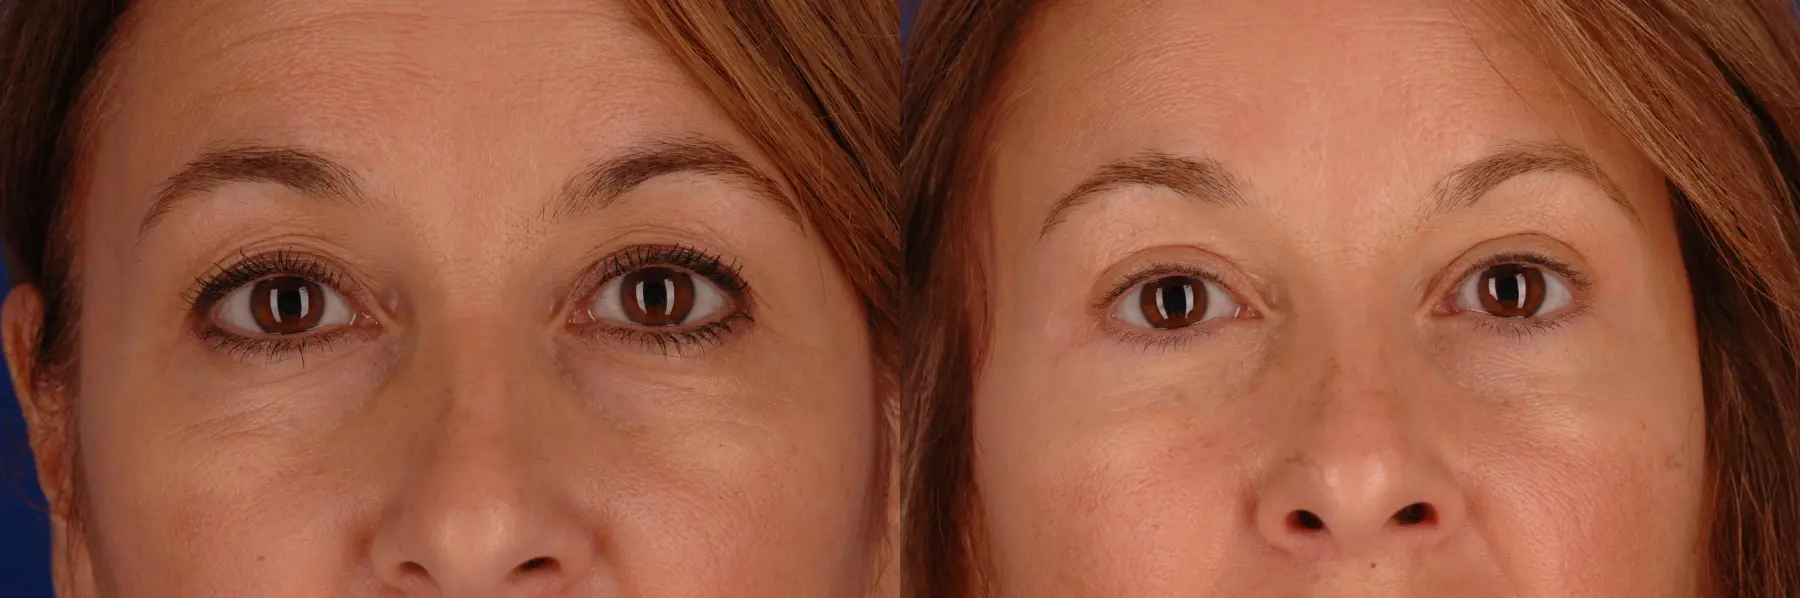 42 year old woman, upper and lower blepharoplasty - Before and After